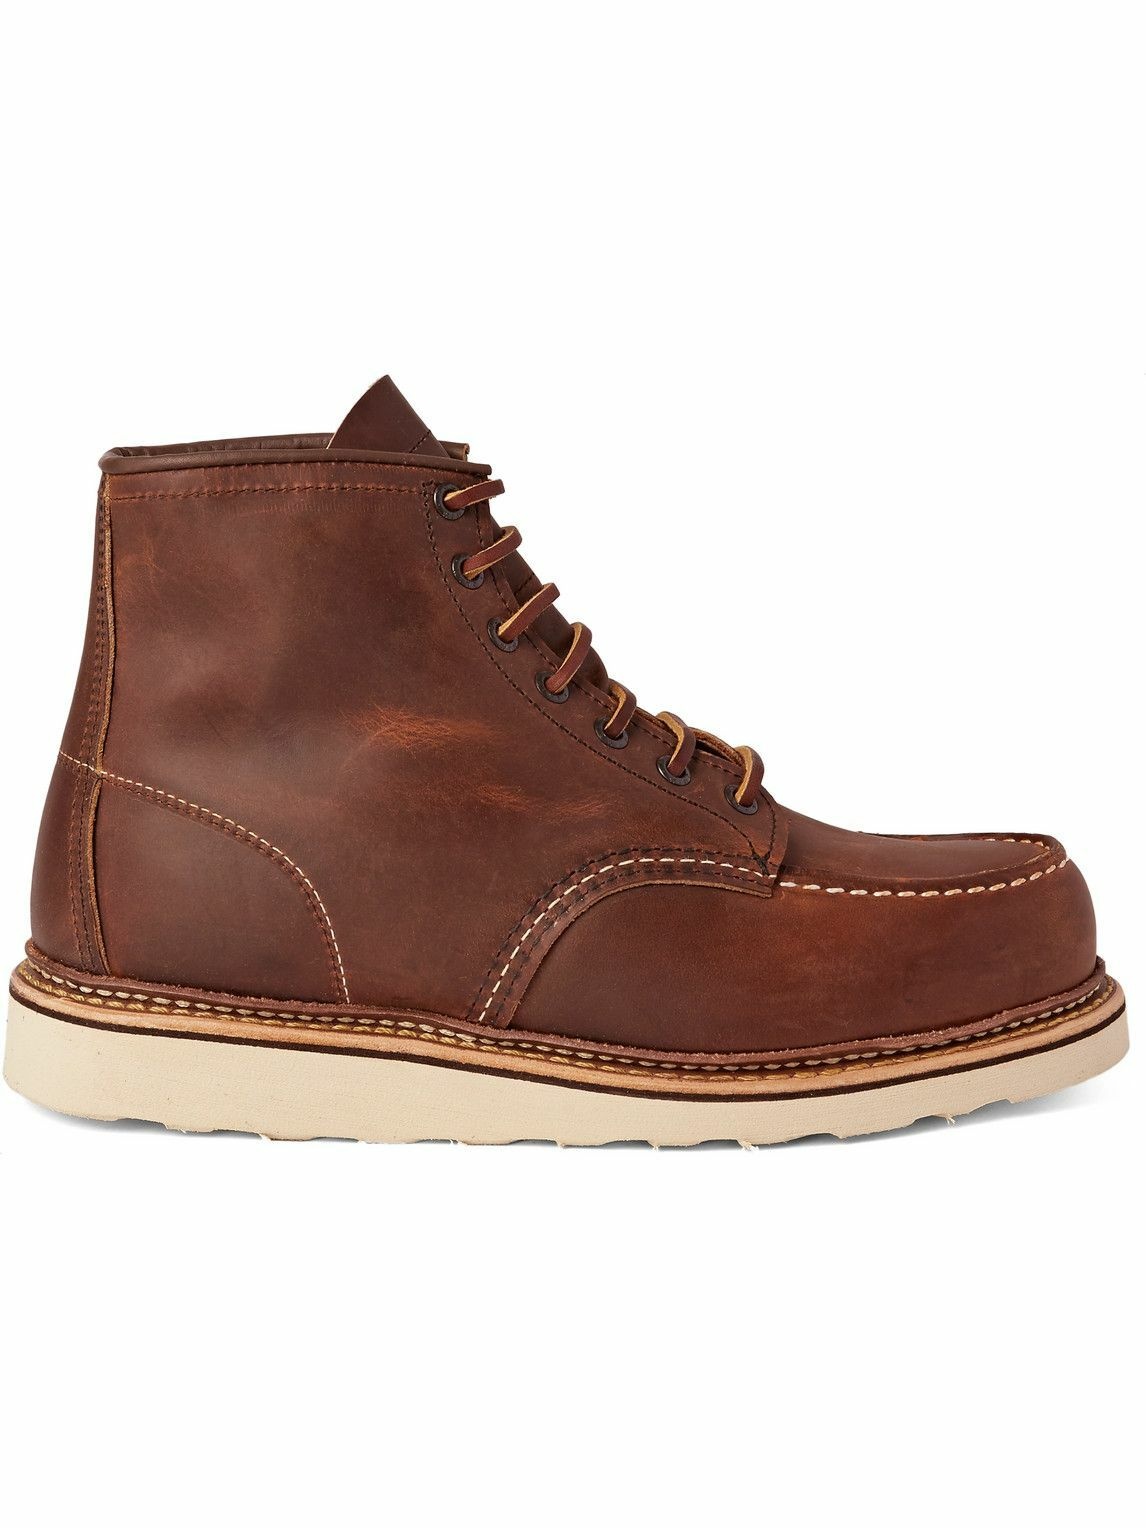 Red Wing Shoes - 1907 Classic Moc Leather Boots - Brown Red Wing Shoes